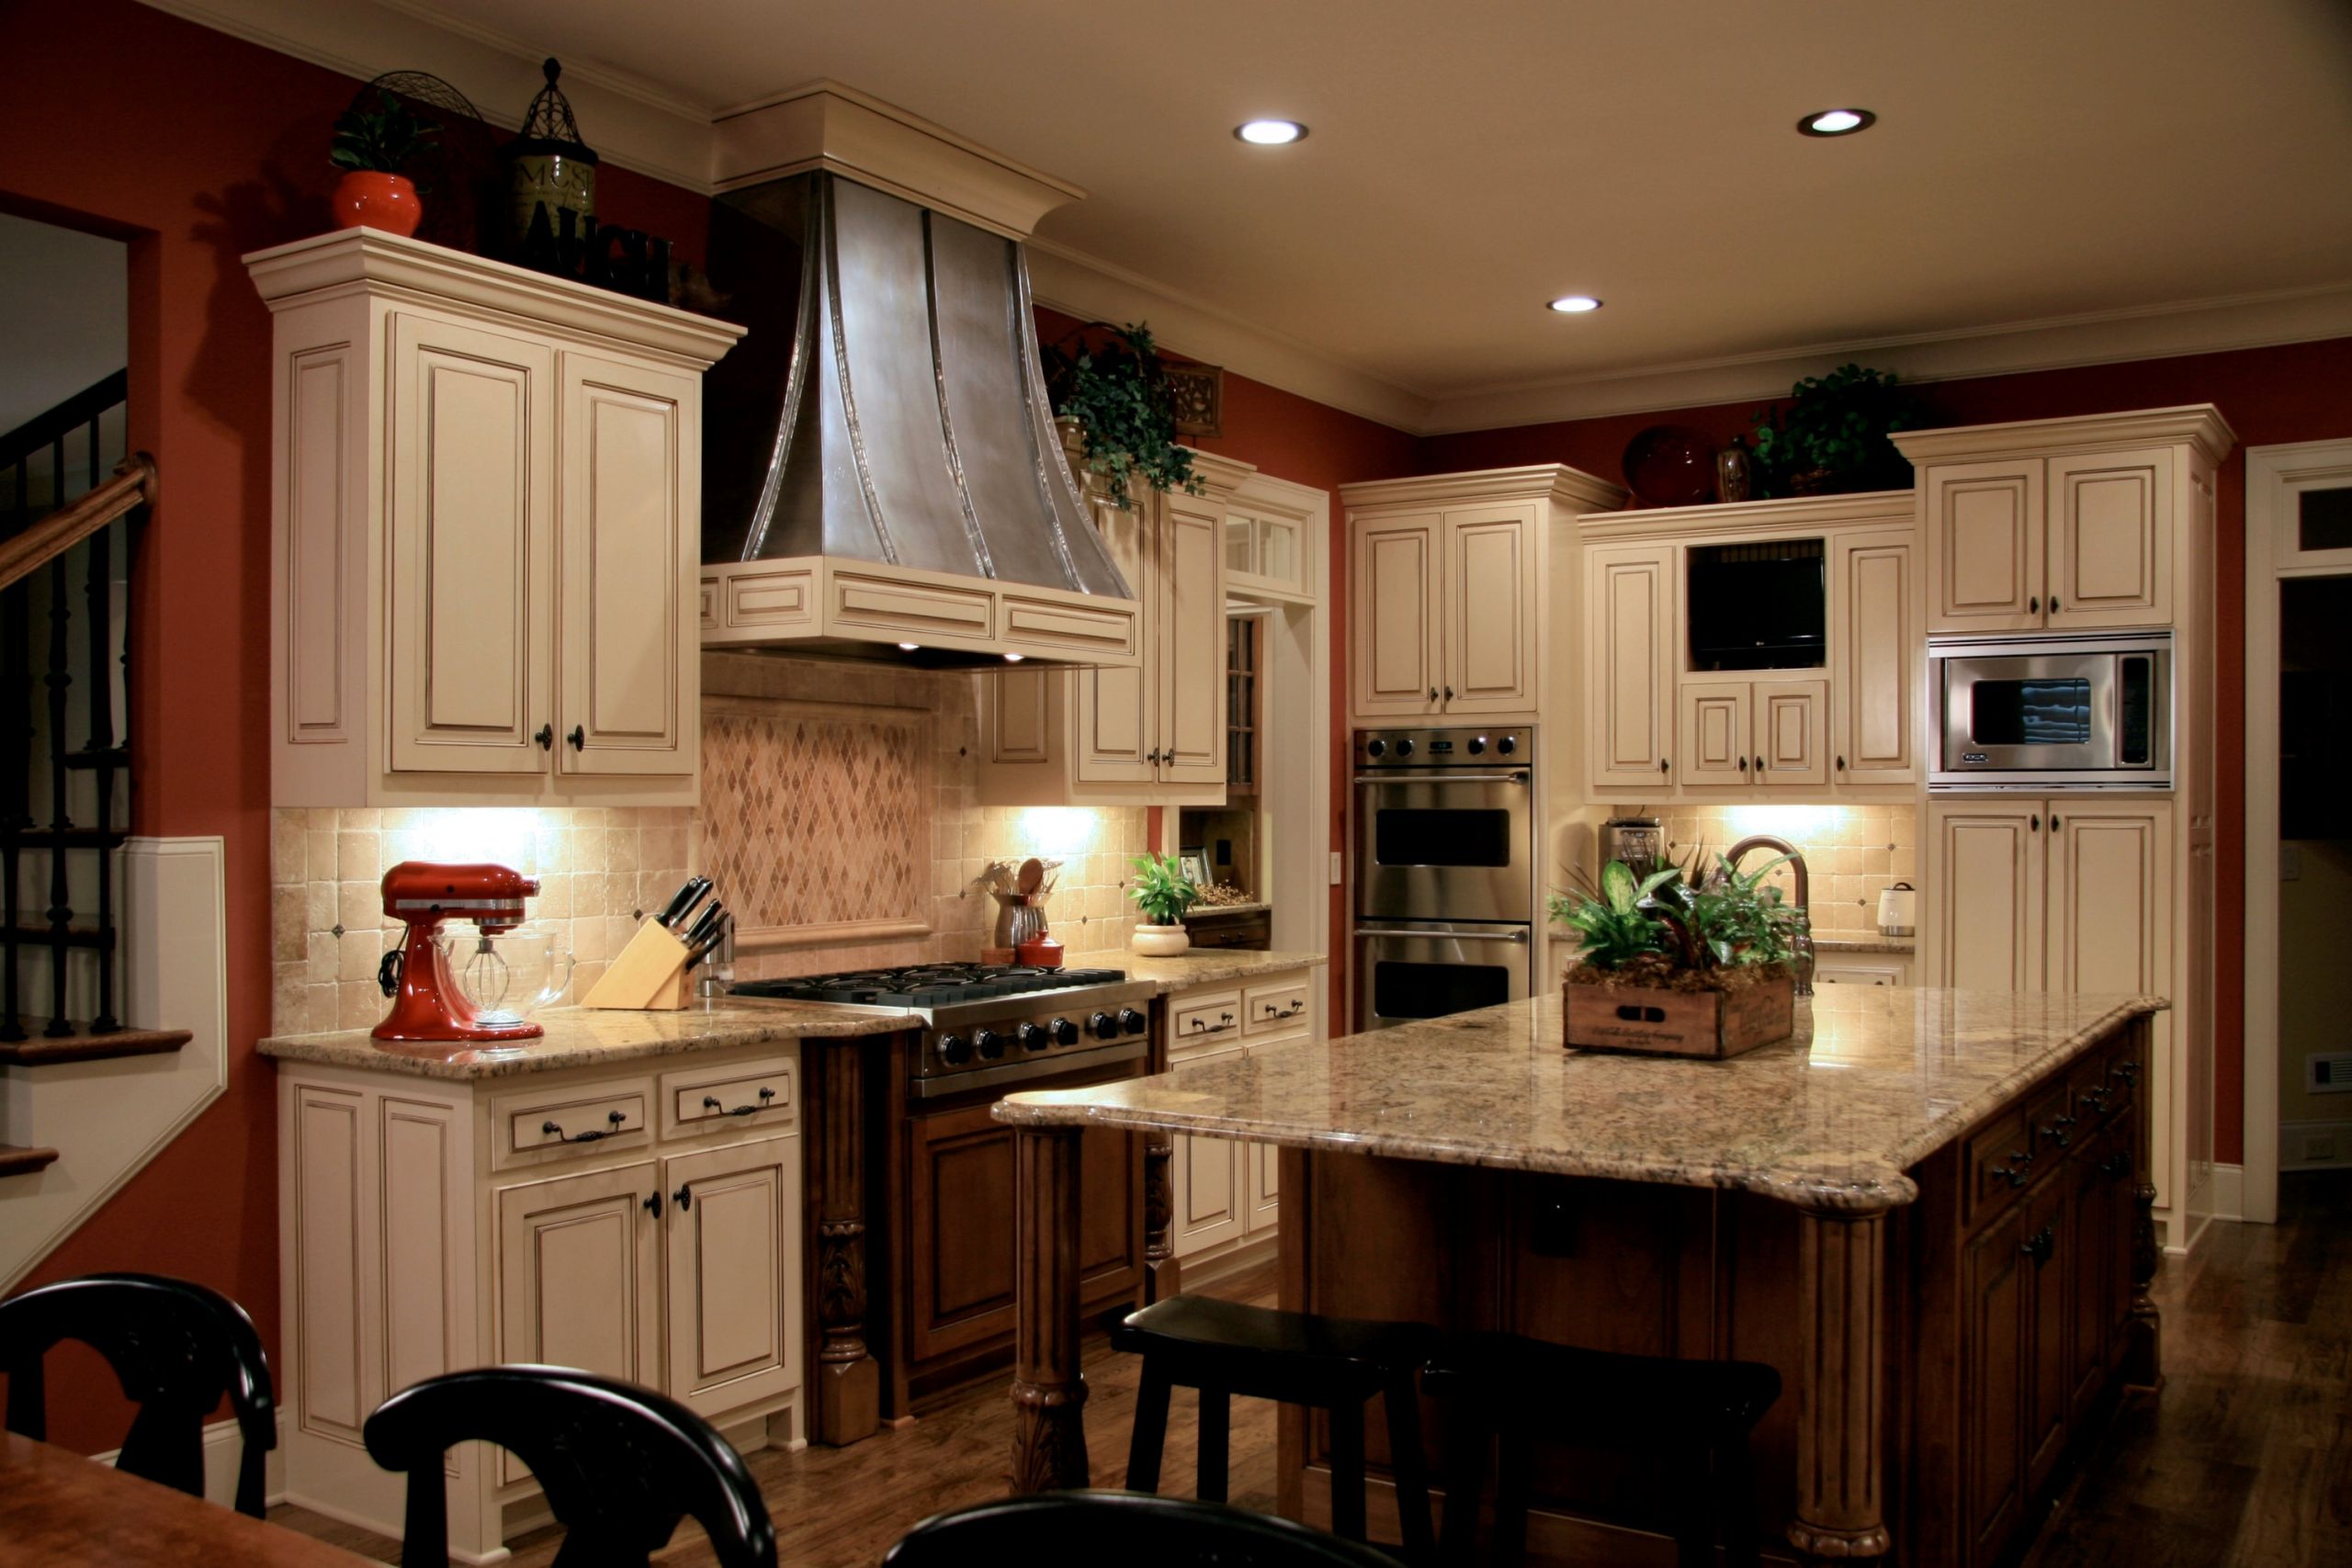 Recessed Lighting In Kitchens
 Install recessed lighting in a kitchen